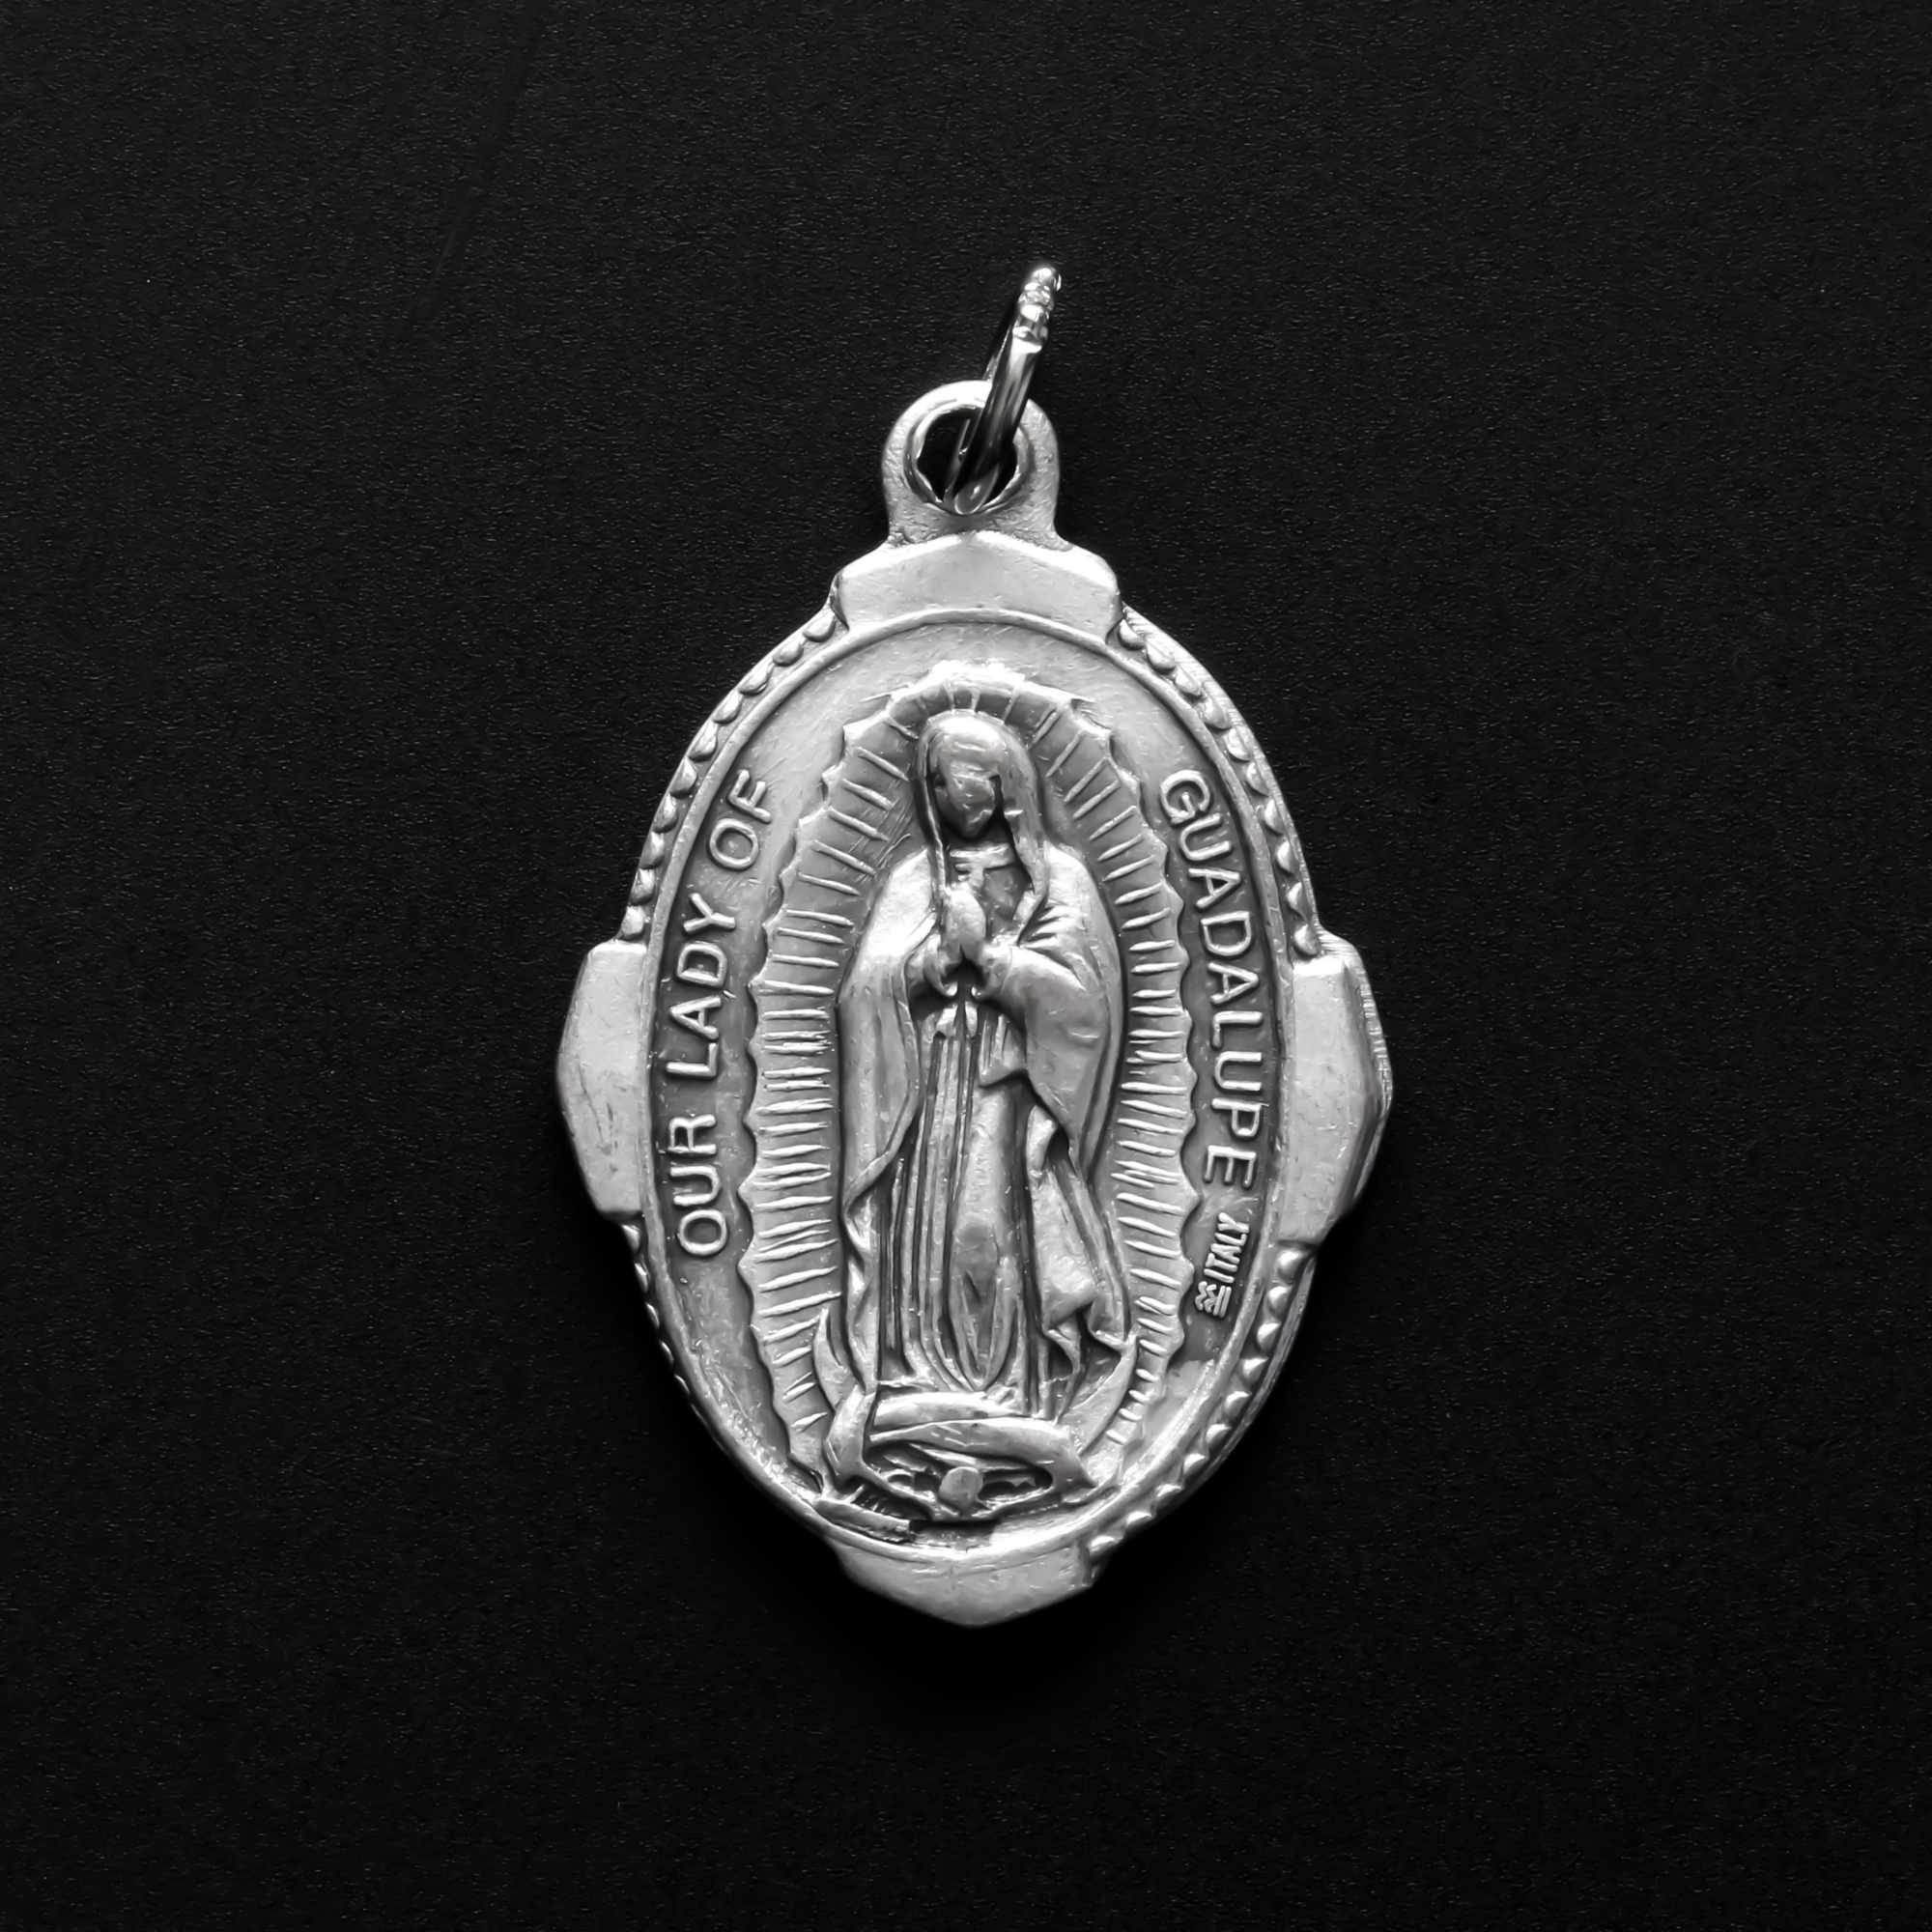 Our Lady of Guadalupe religious medal with deluxe ornate border